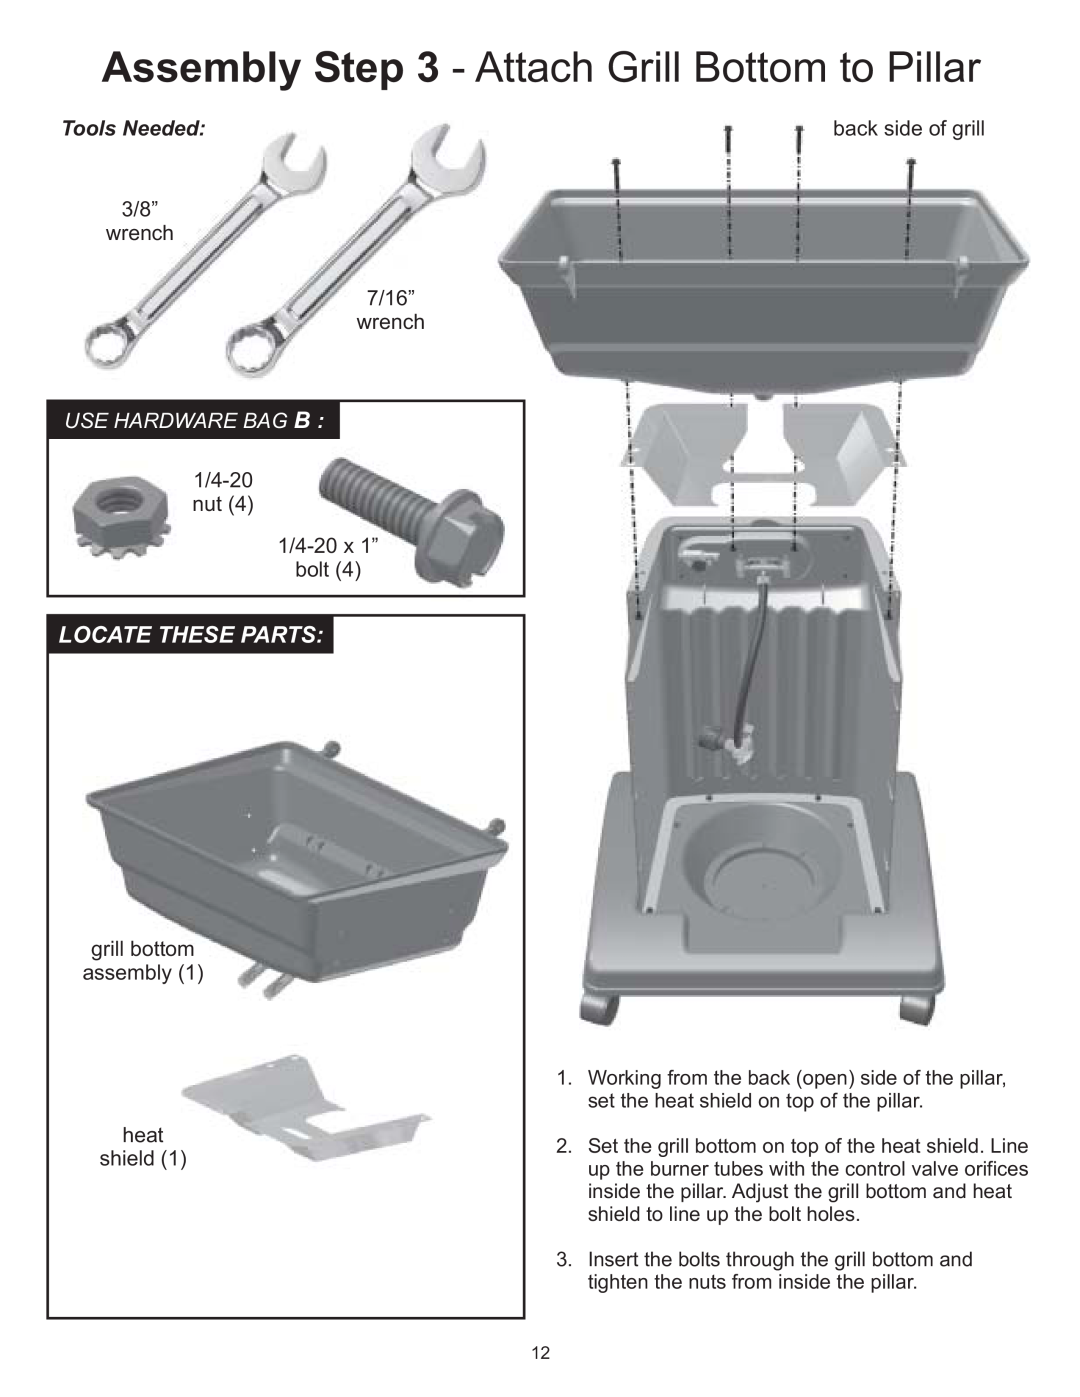 Vermont Casting VC0680P, VC0680N owner manual Assembly - Attach Grill Bottom to Pillar, Locate These Parts, Tools Needed 